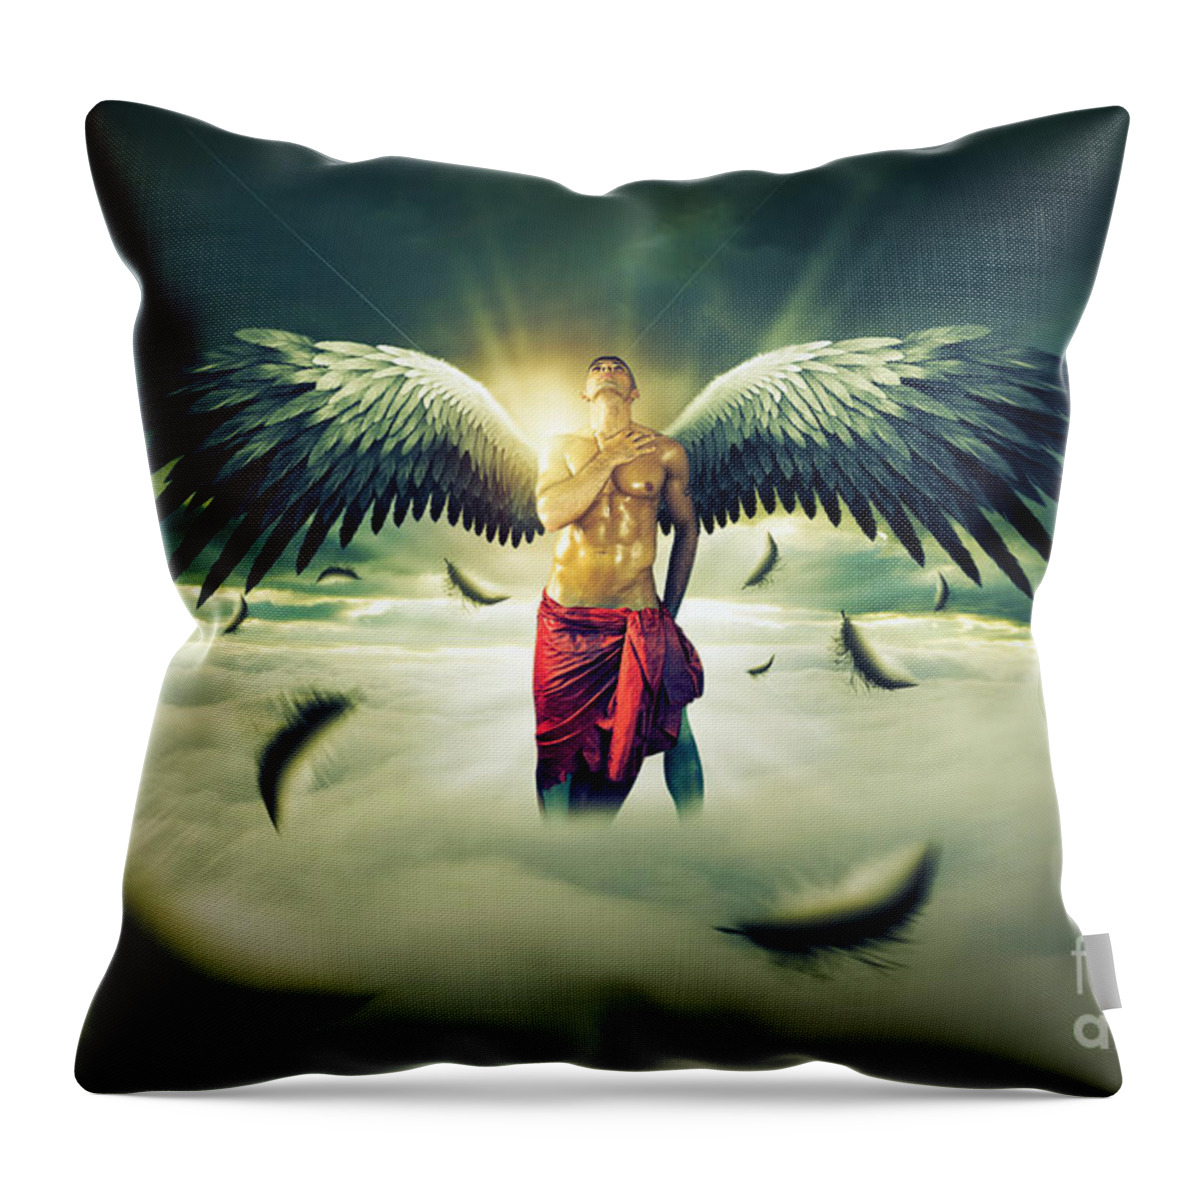 Angel Throw Pillow featuring the digital art New Life by Mark Ashkenazi